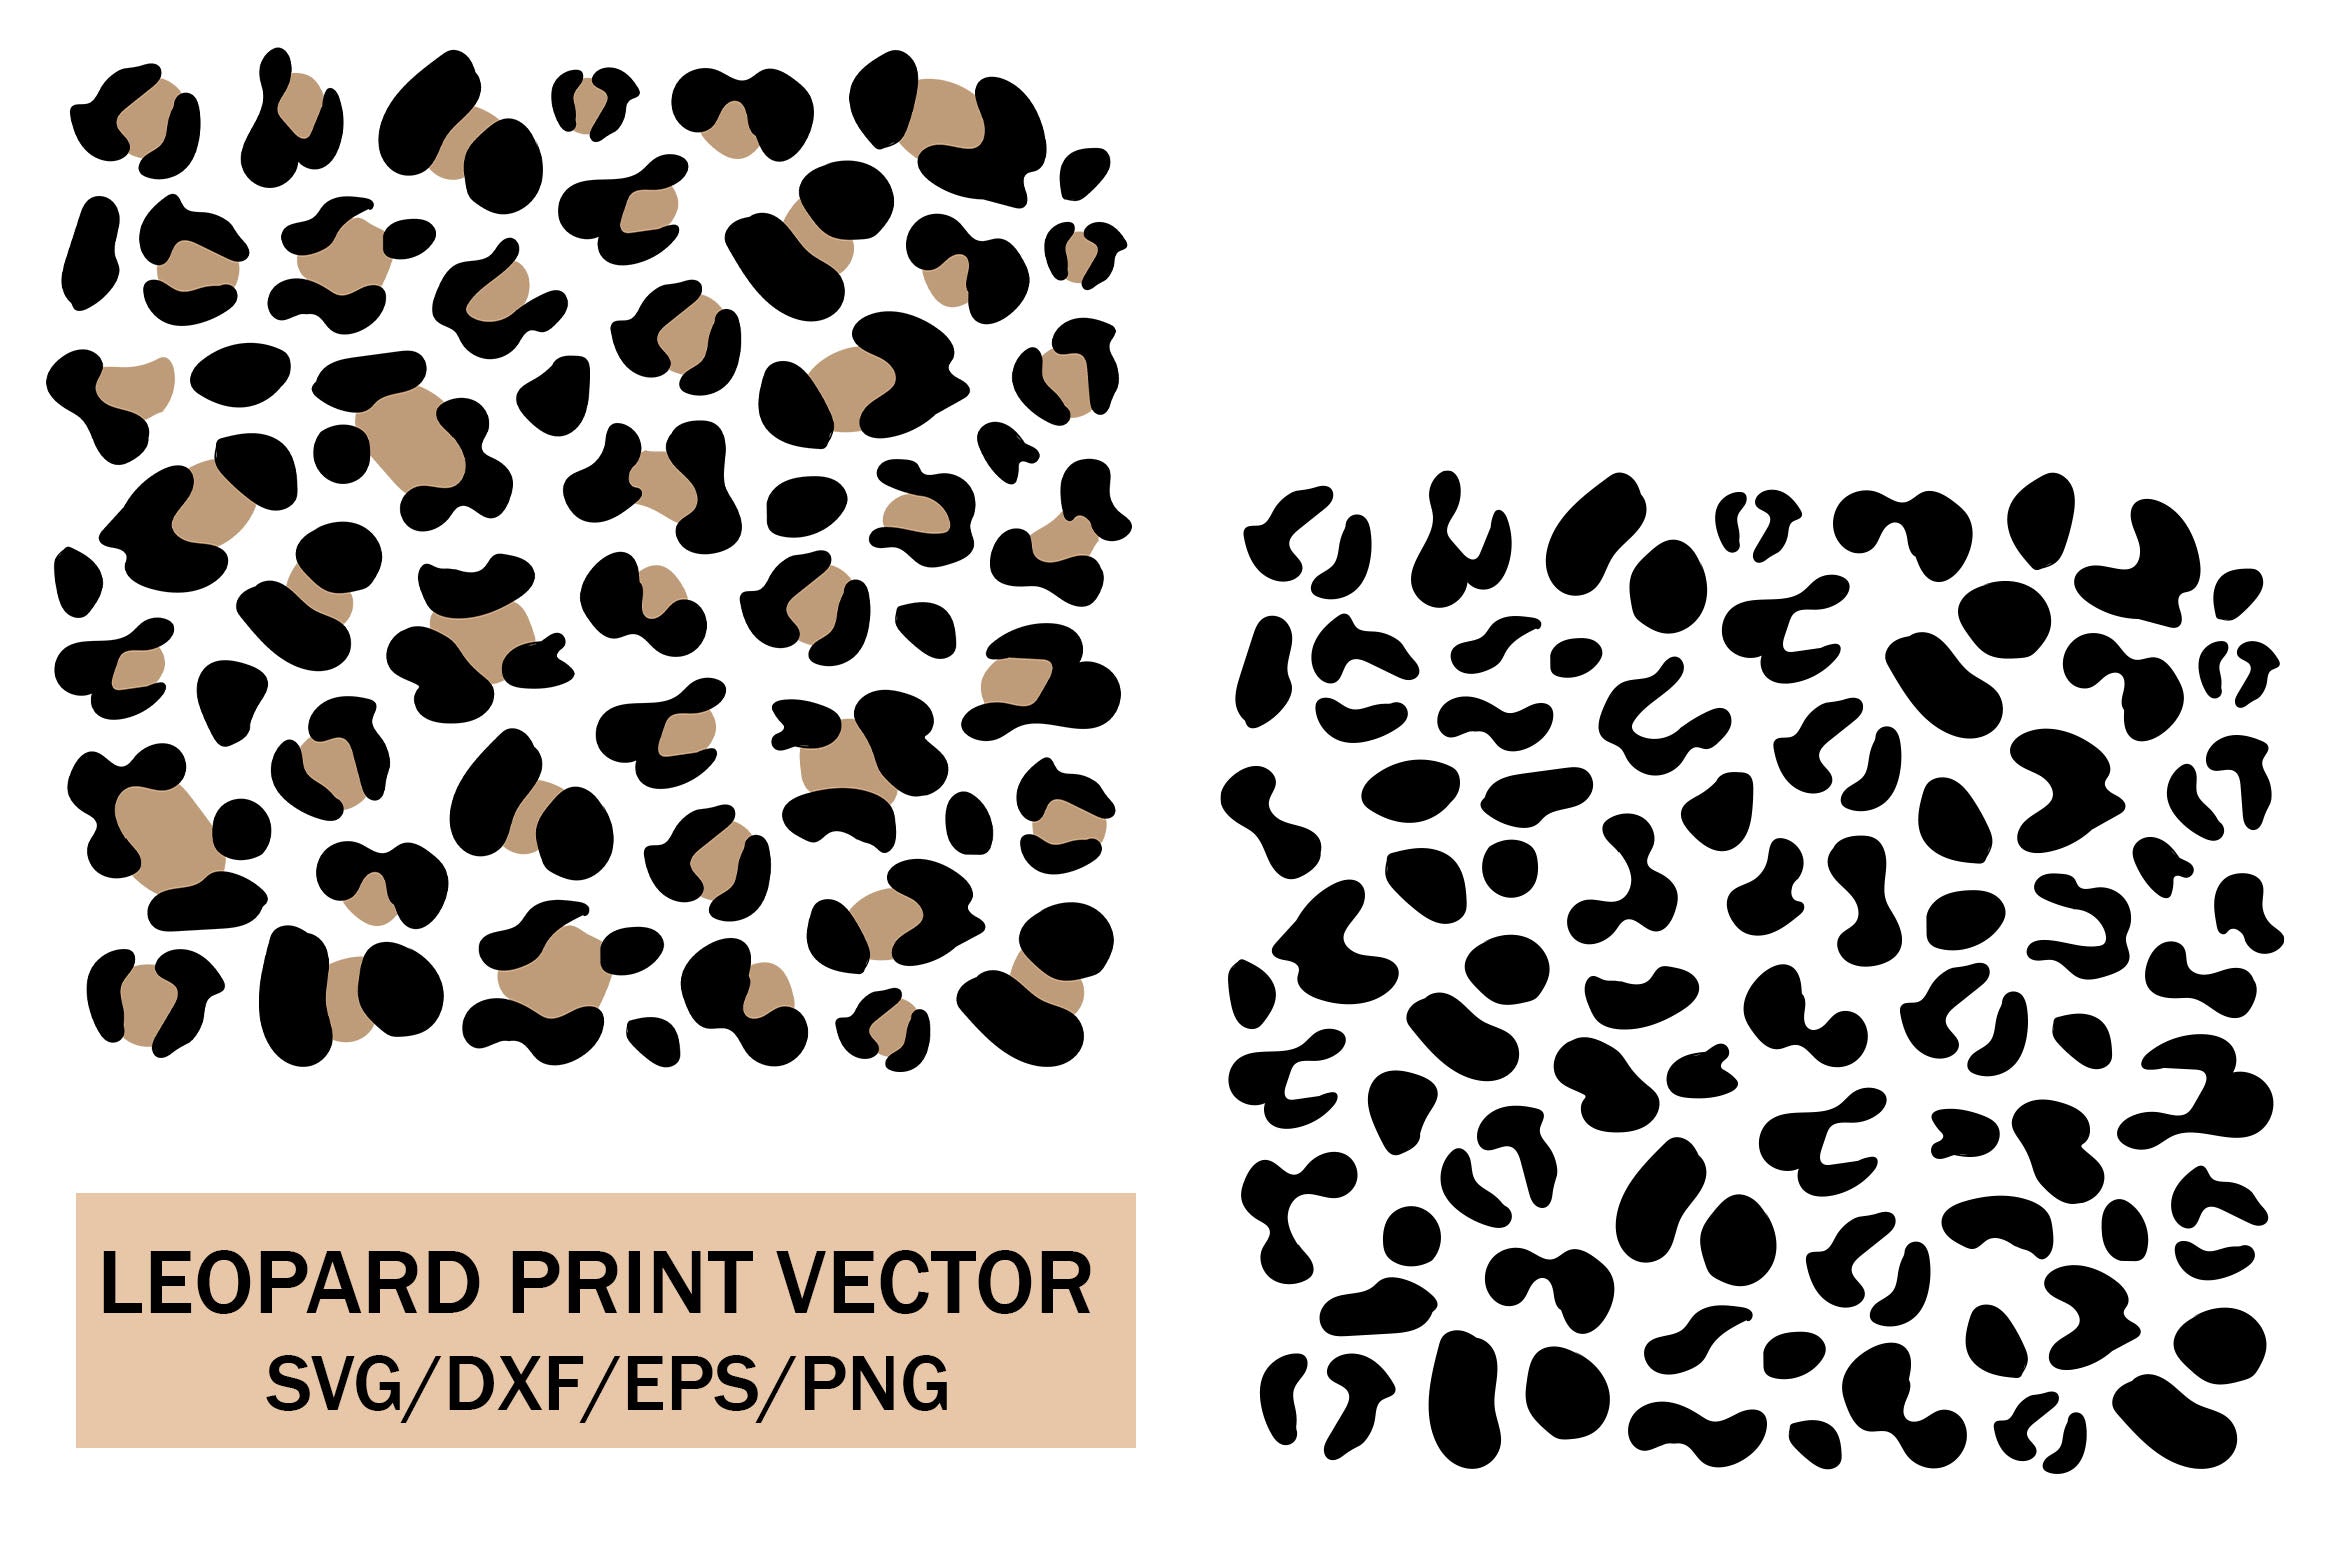 https://sofontsy.com/cdn/shop/products/layered-leopard-print-svgs-leopard-svg-leopard-texture-svgs-cheetah-print-two-color-layered-leopard-pattern-for-cricut-vinyl-decal-file-svg-md-mominul-islam-775432_2350x.jpg?v=1656062018